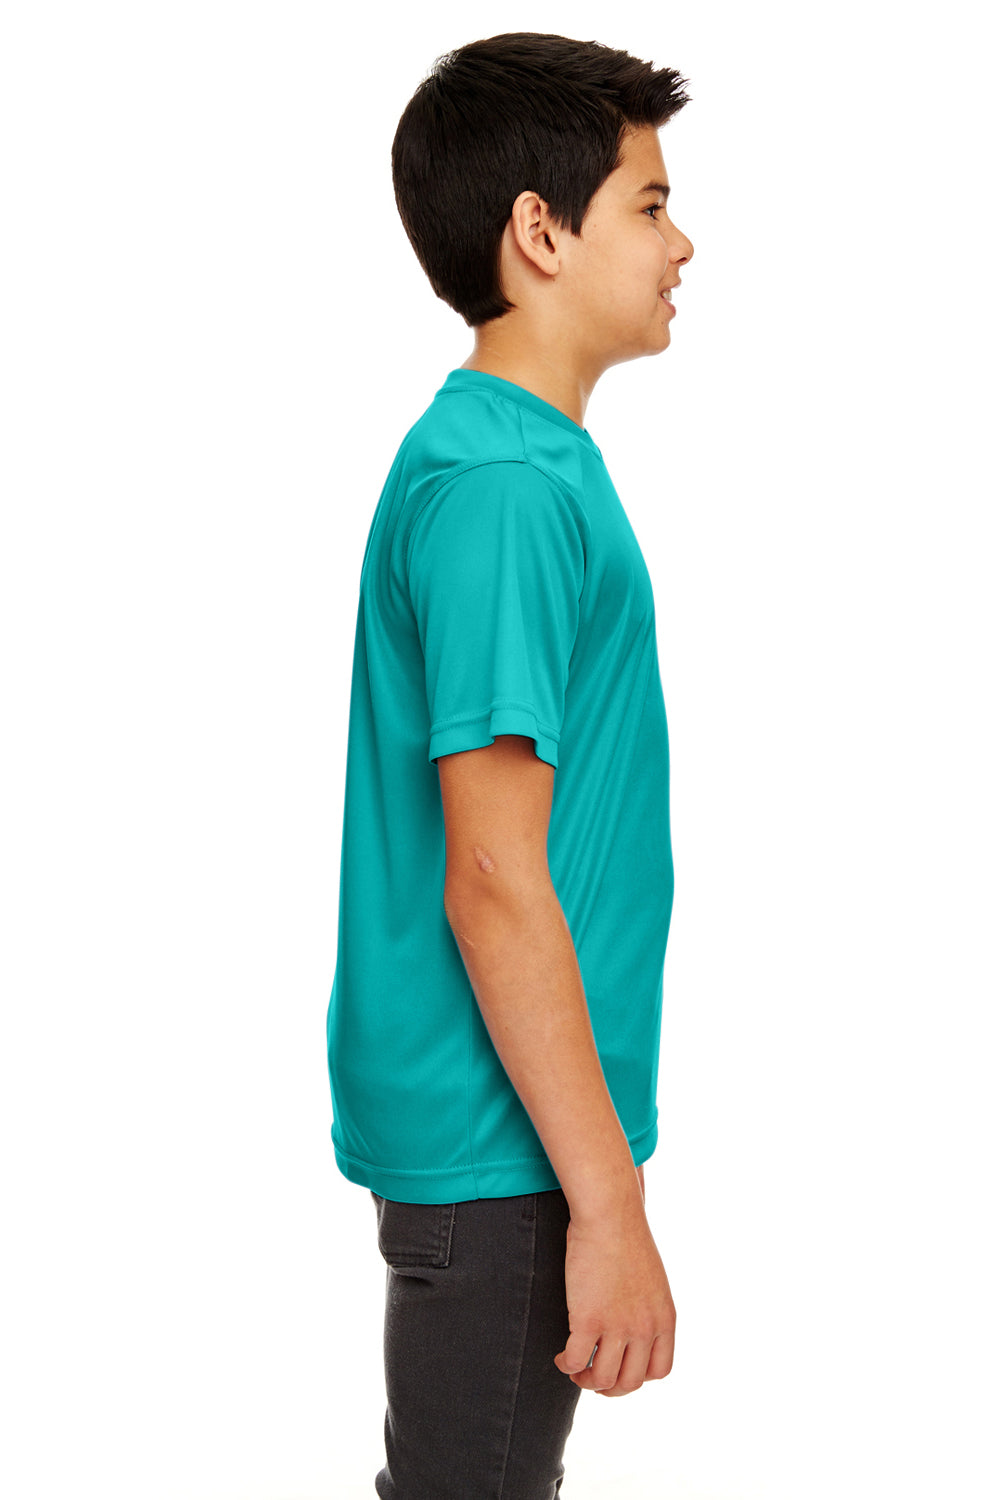 UltraClub 8420Y Youth Cool & Dry Performance Moisture Wicking Short Sleeve Crewneck T-Shirt Jade Green Side